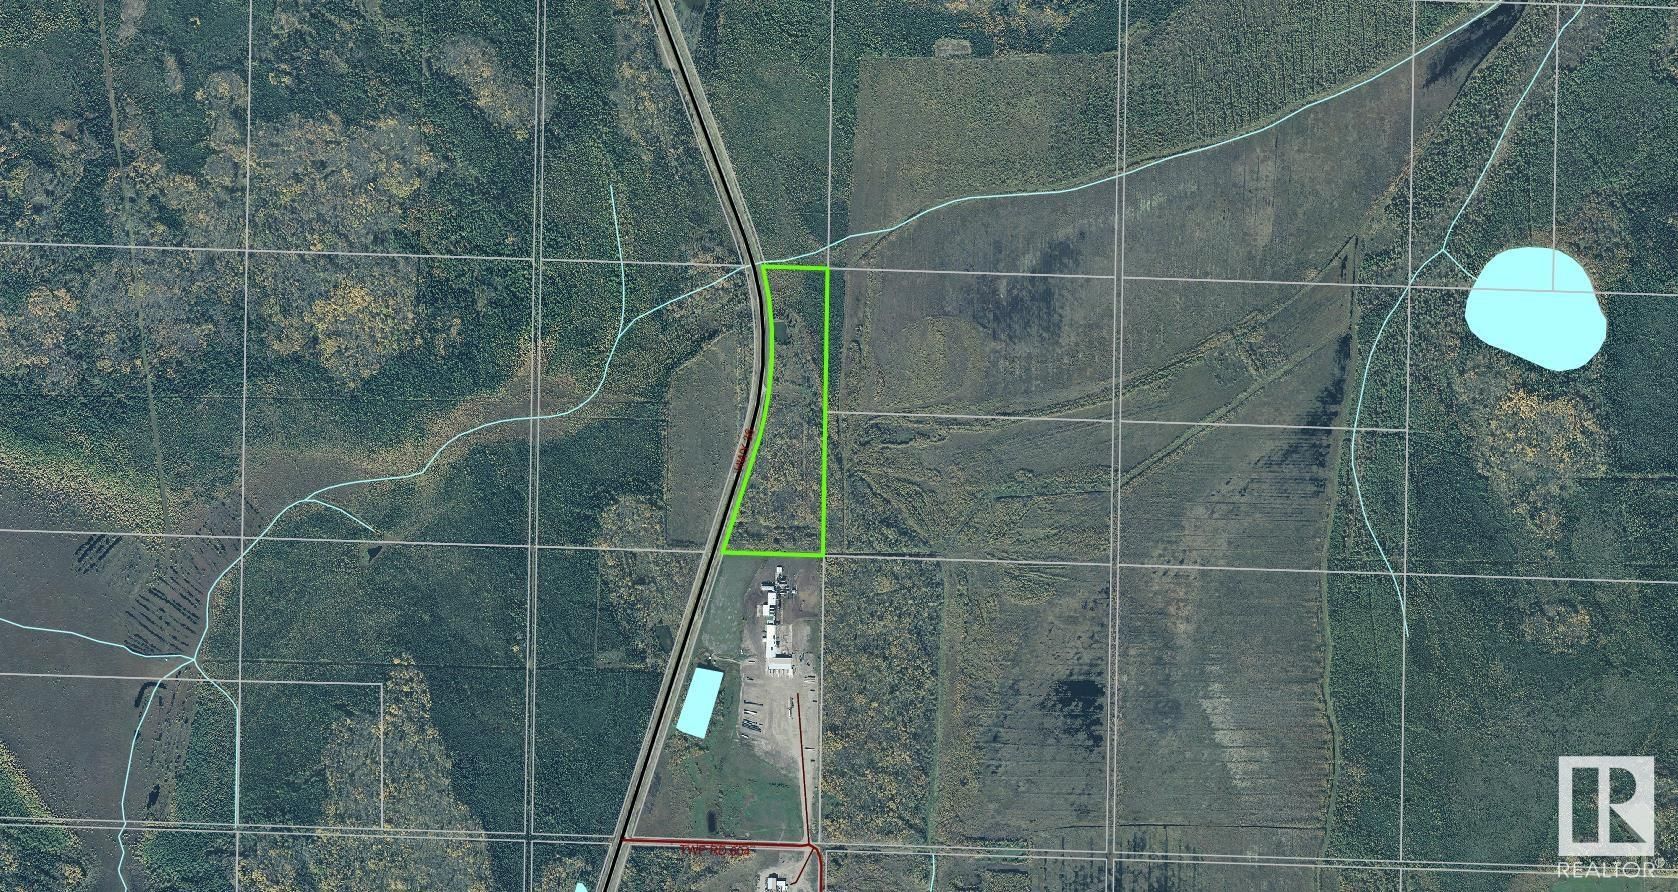 Main Photo: NW 27 60-14 W4: Rural Smoky Lake County Rural Land/Vacant Lot for sale : MLS®# E4311581